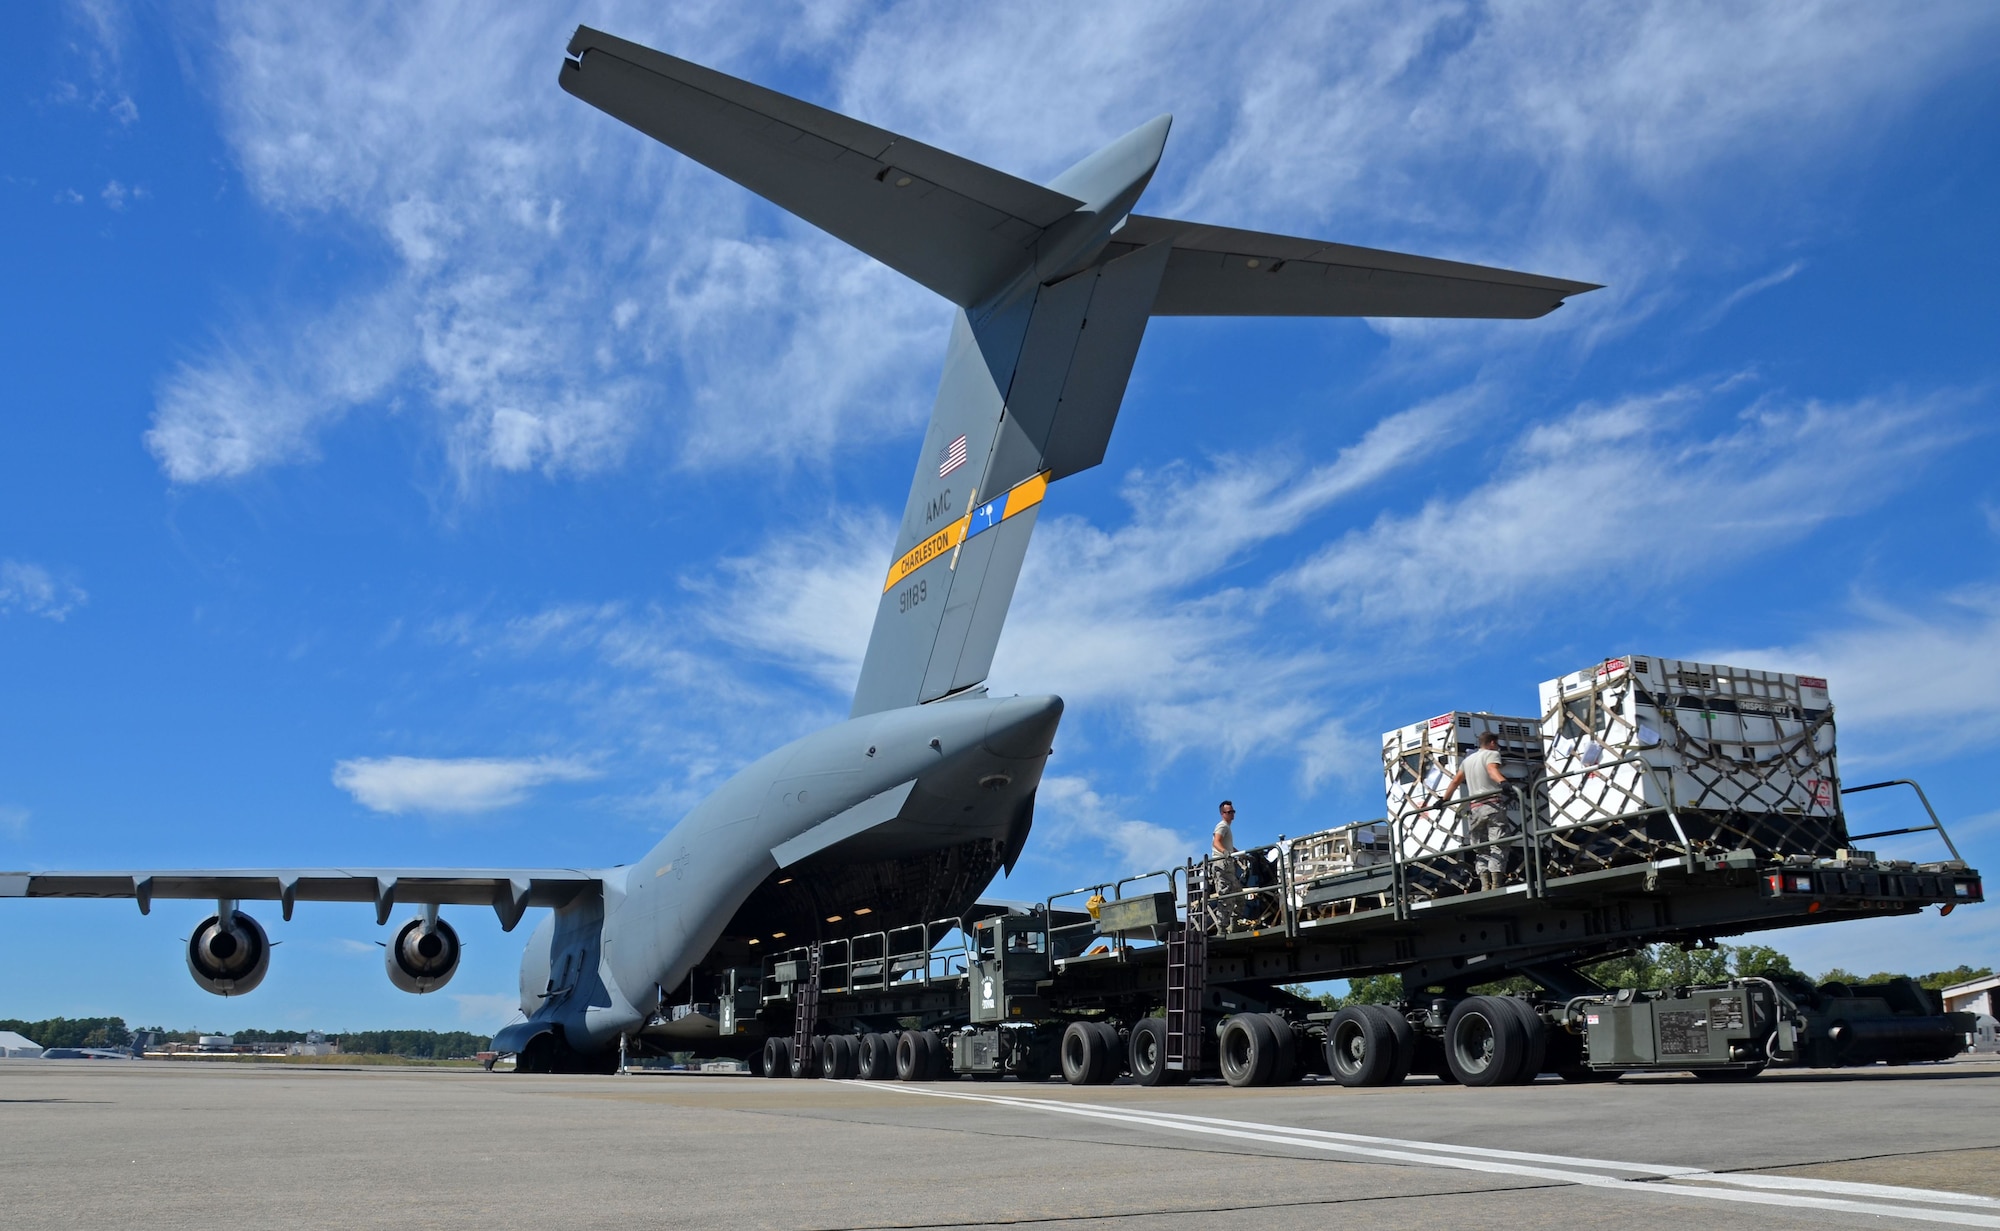 Reserve Citizen Airmen of the 94th Airlift Wing and other Air Force Reserve units load generators onto a C-17 Globemaster III at Dobbins Air Reserve Base, Ga., Oct. 1, 2017. Air Force and FEMA contracted aircraft arrived at Dobbins to pick up medical equipment and relief supplies, to include communication assets. (U.S. Air Force photo by TSgt. Kelly Goonan)